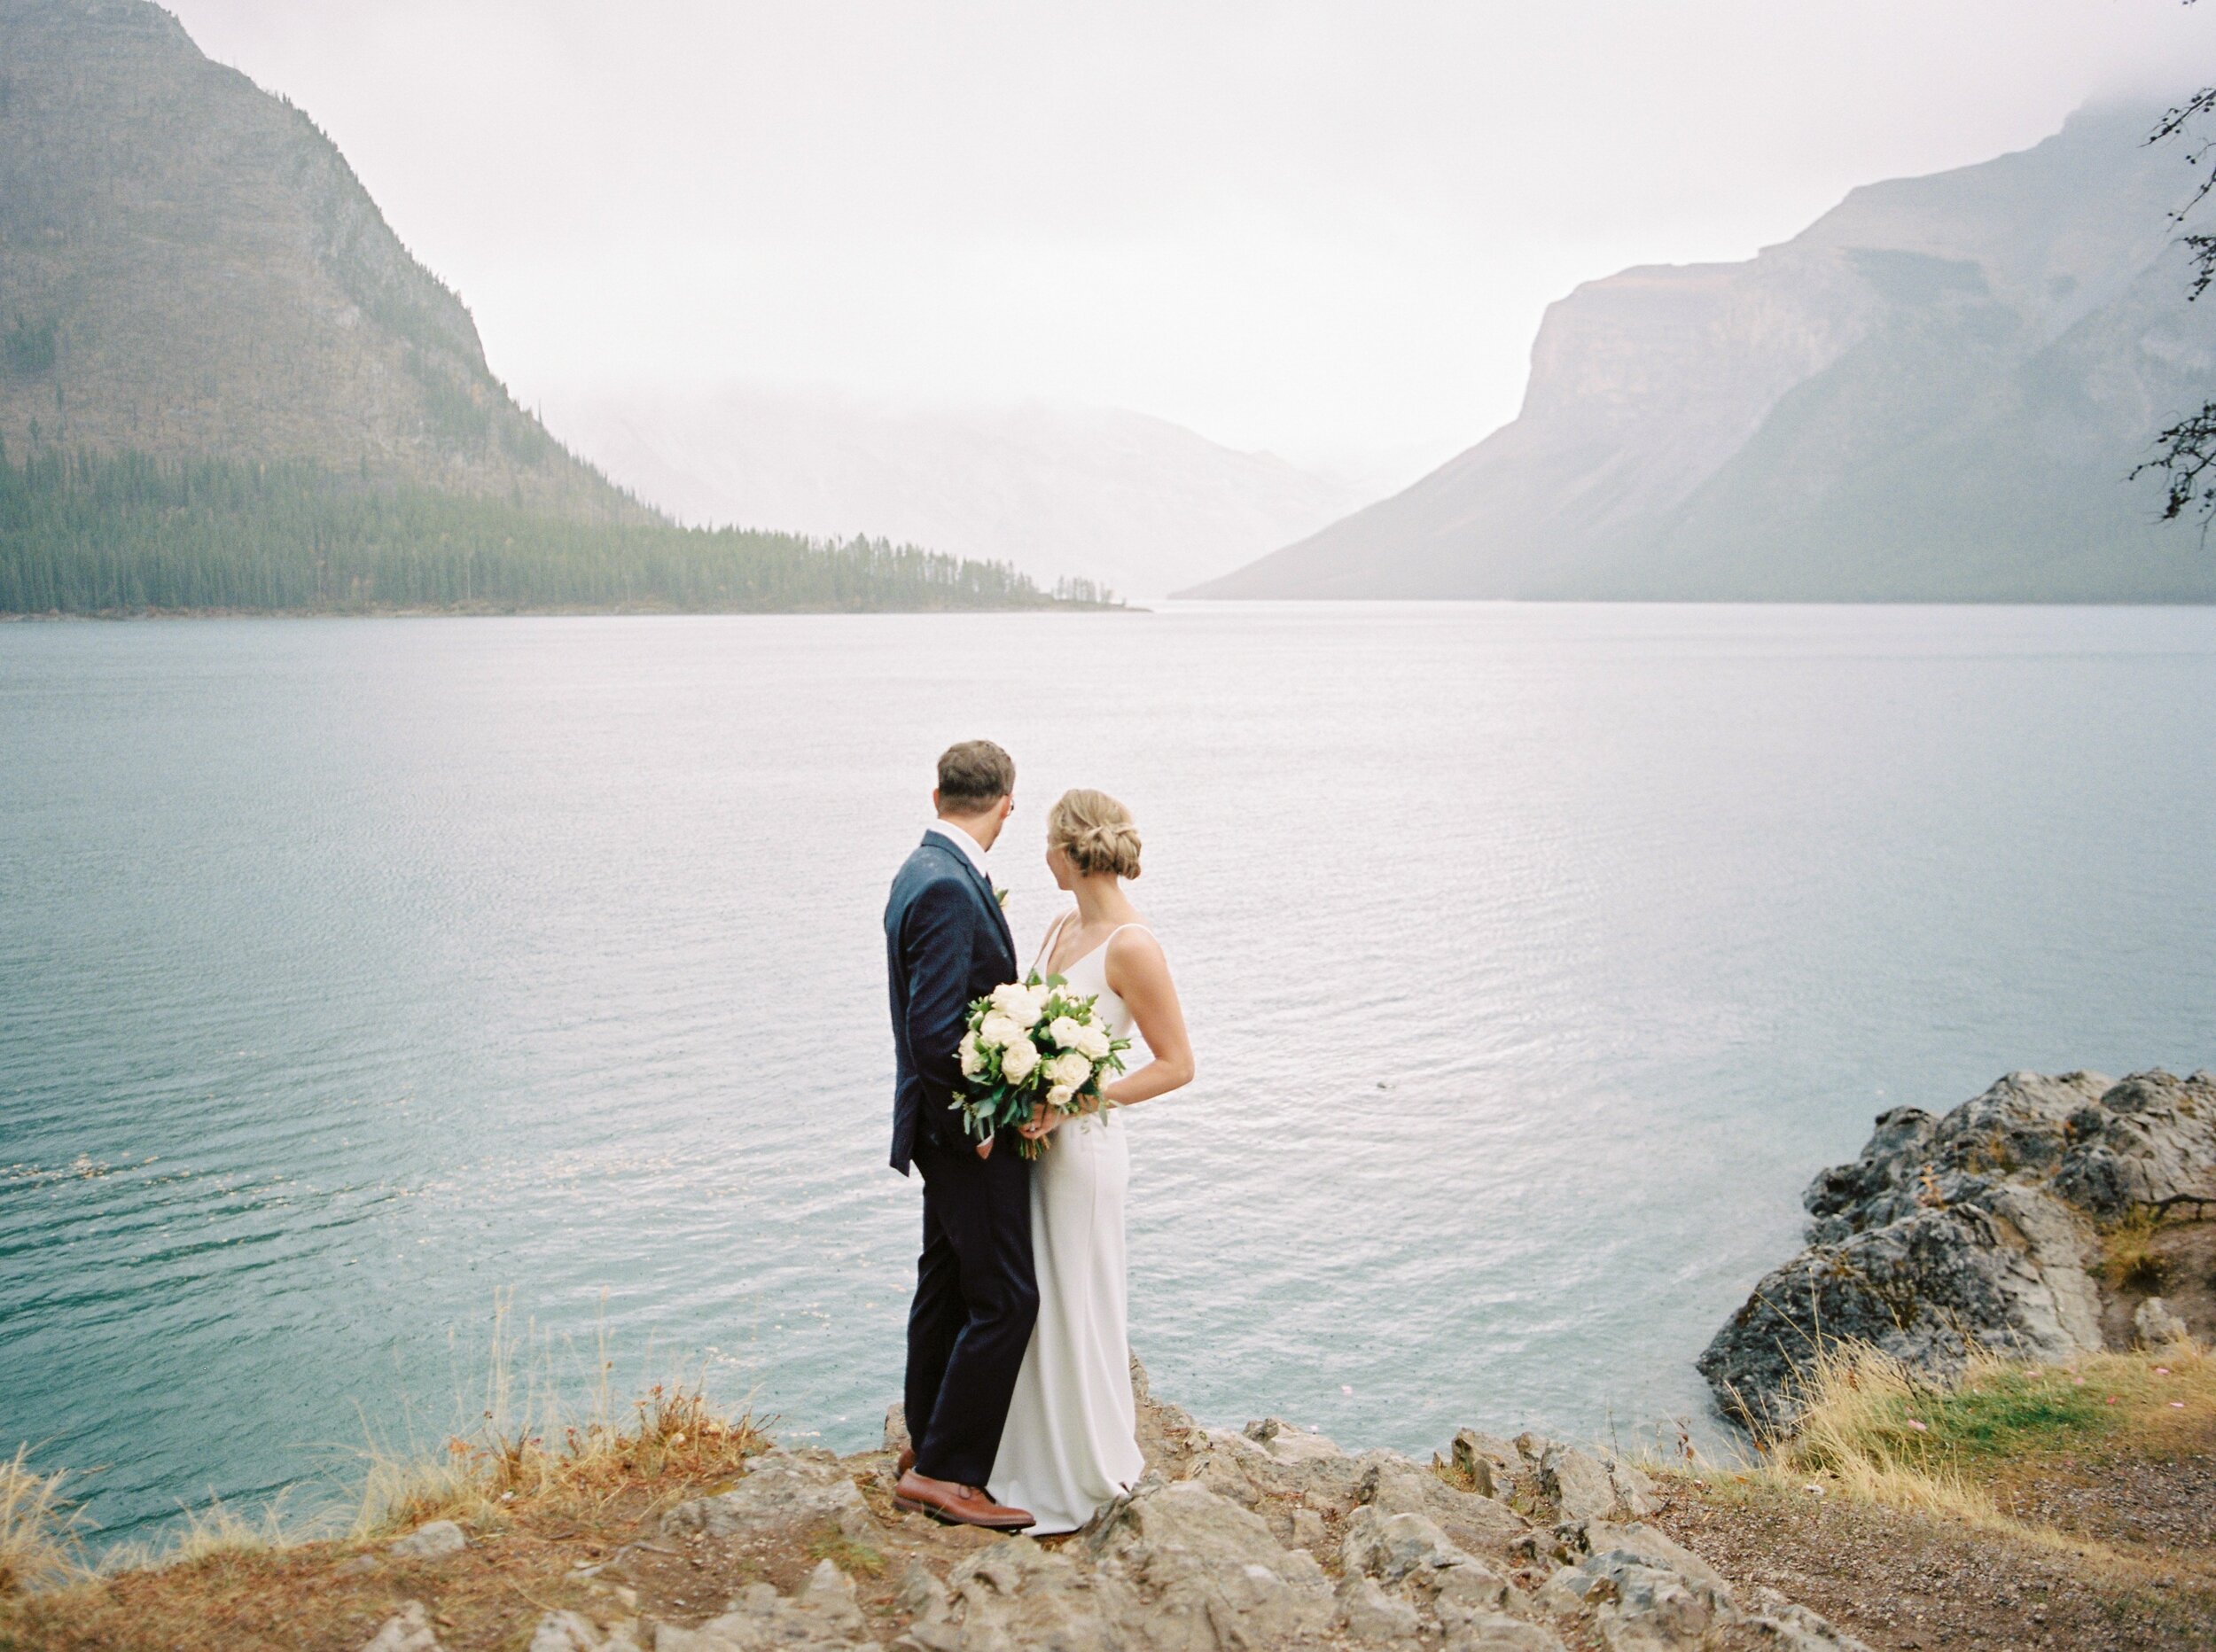  Bride and groom portraits in the pouring rain | Banff Springs Hotel Vow Renewal Wedding Photographers 